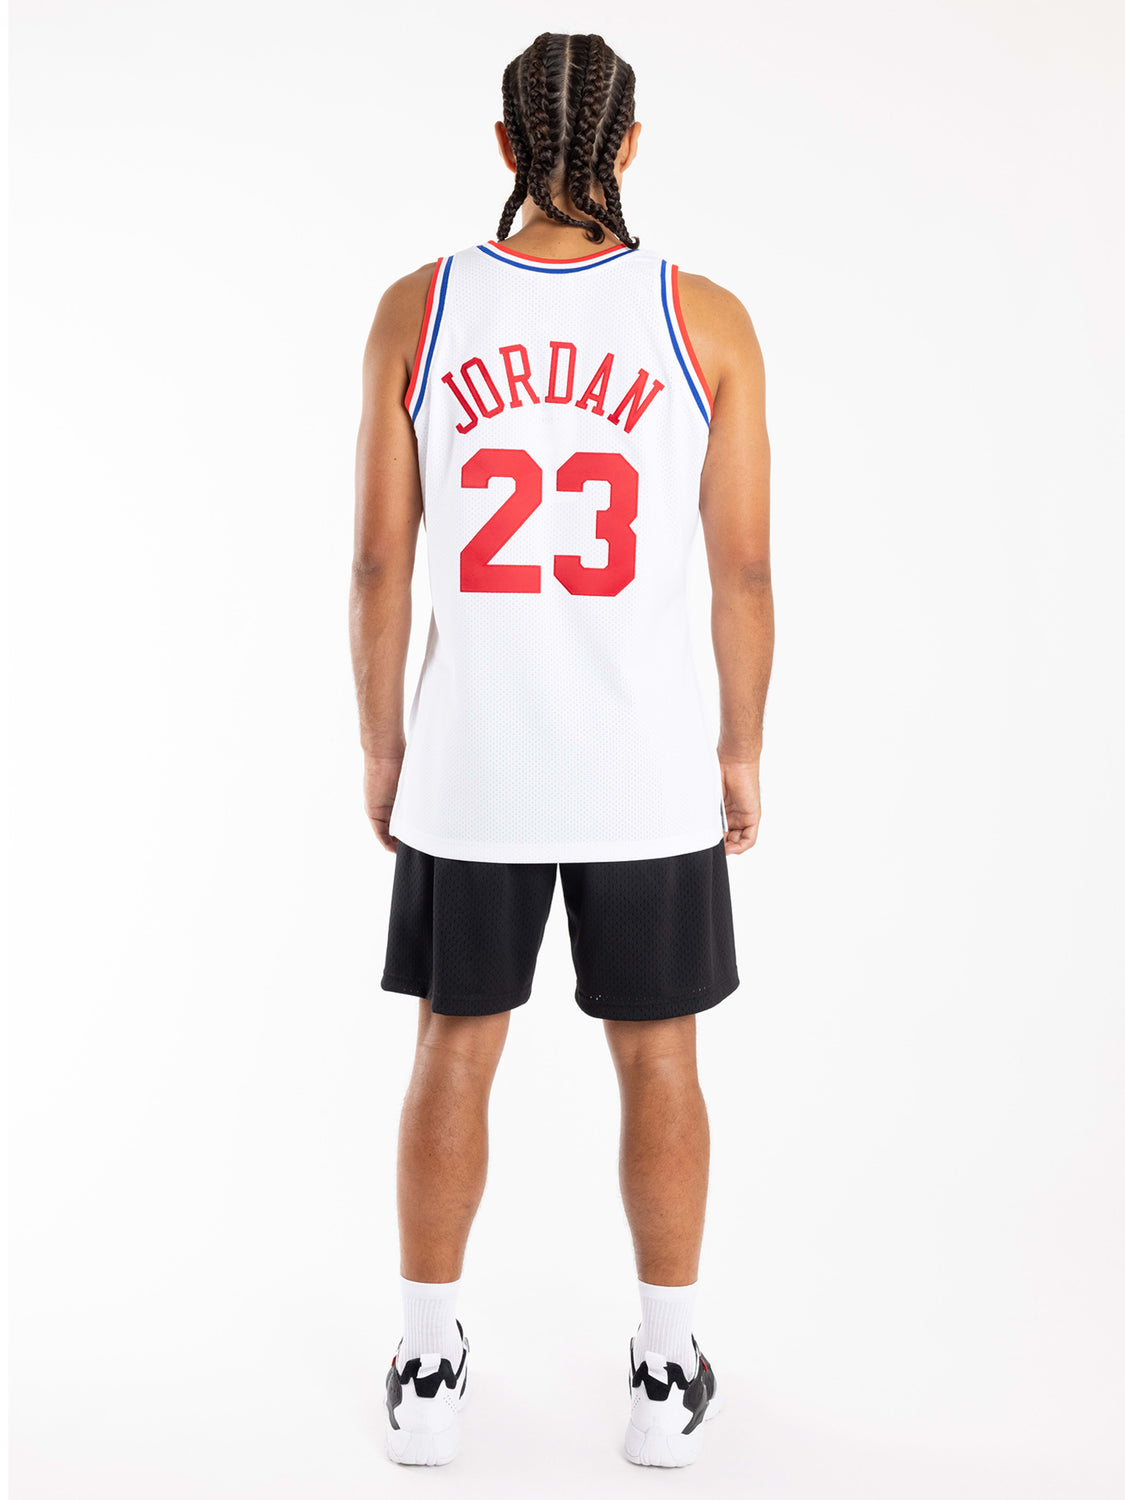 Mitchell & Ness All Star East '91 Michael Jordan Authentic Jersey Shirt - White, Size S by Sneaker Politics